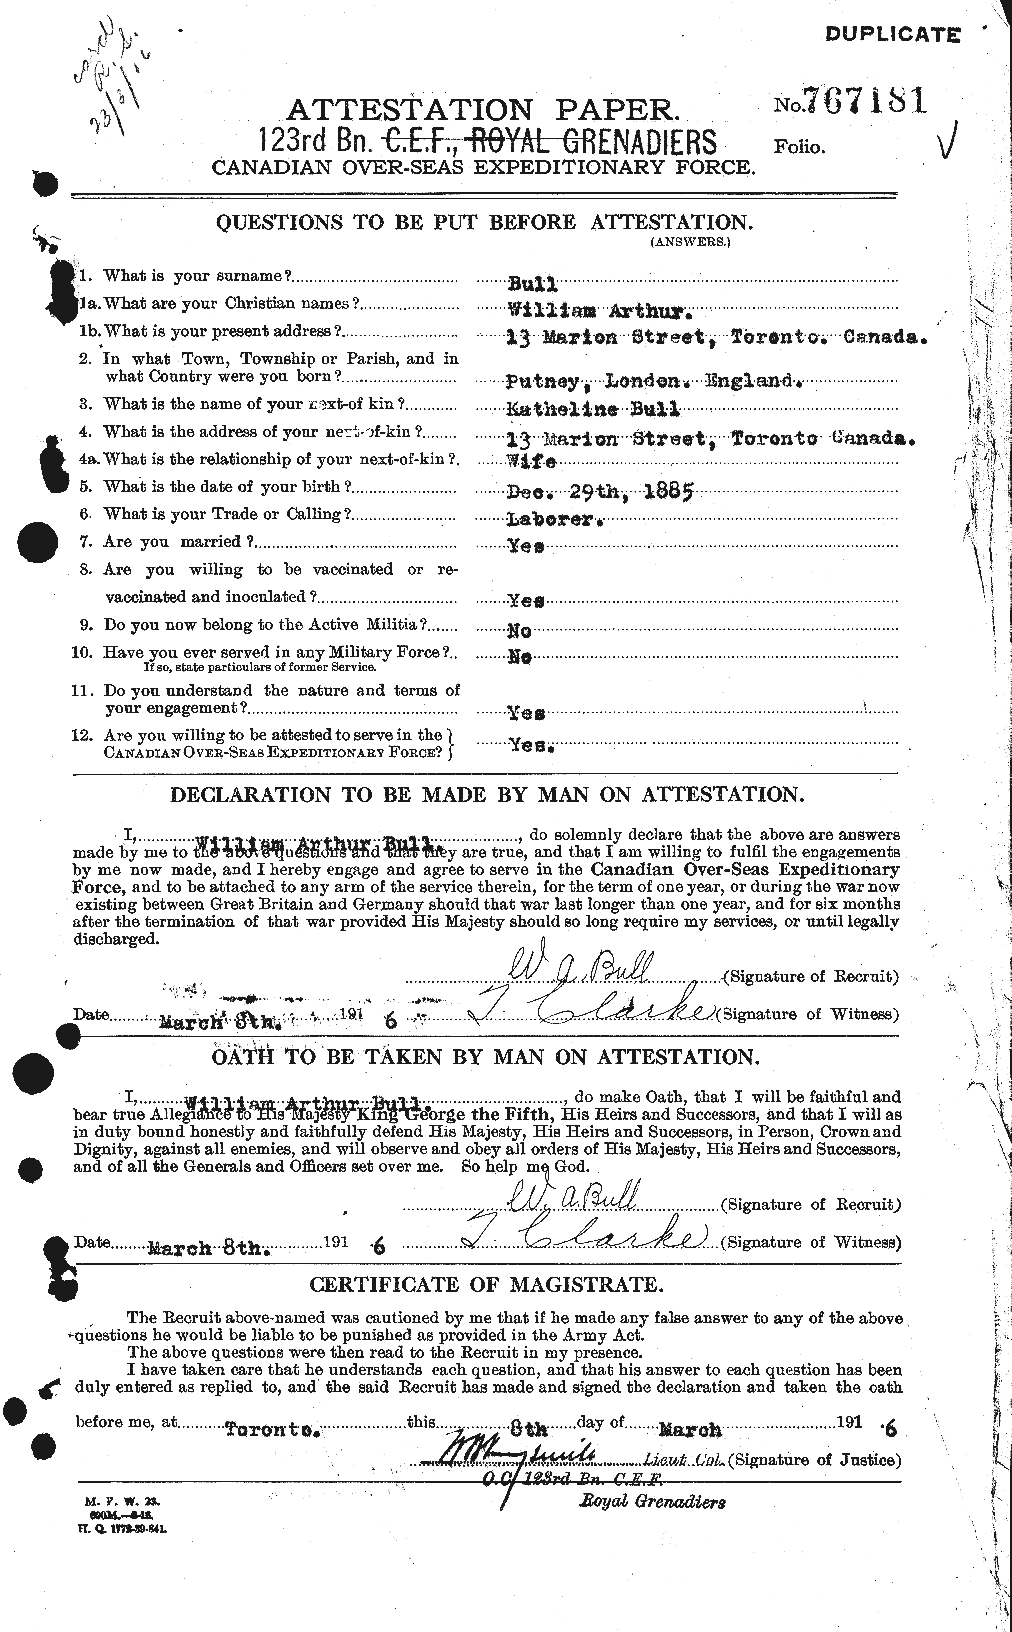 Personnel Records of the First World War - CEF 273457a